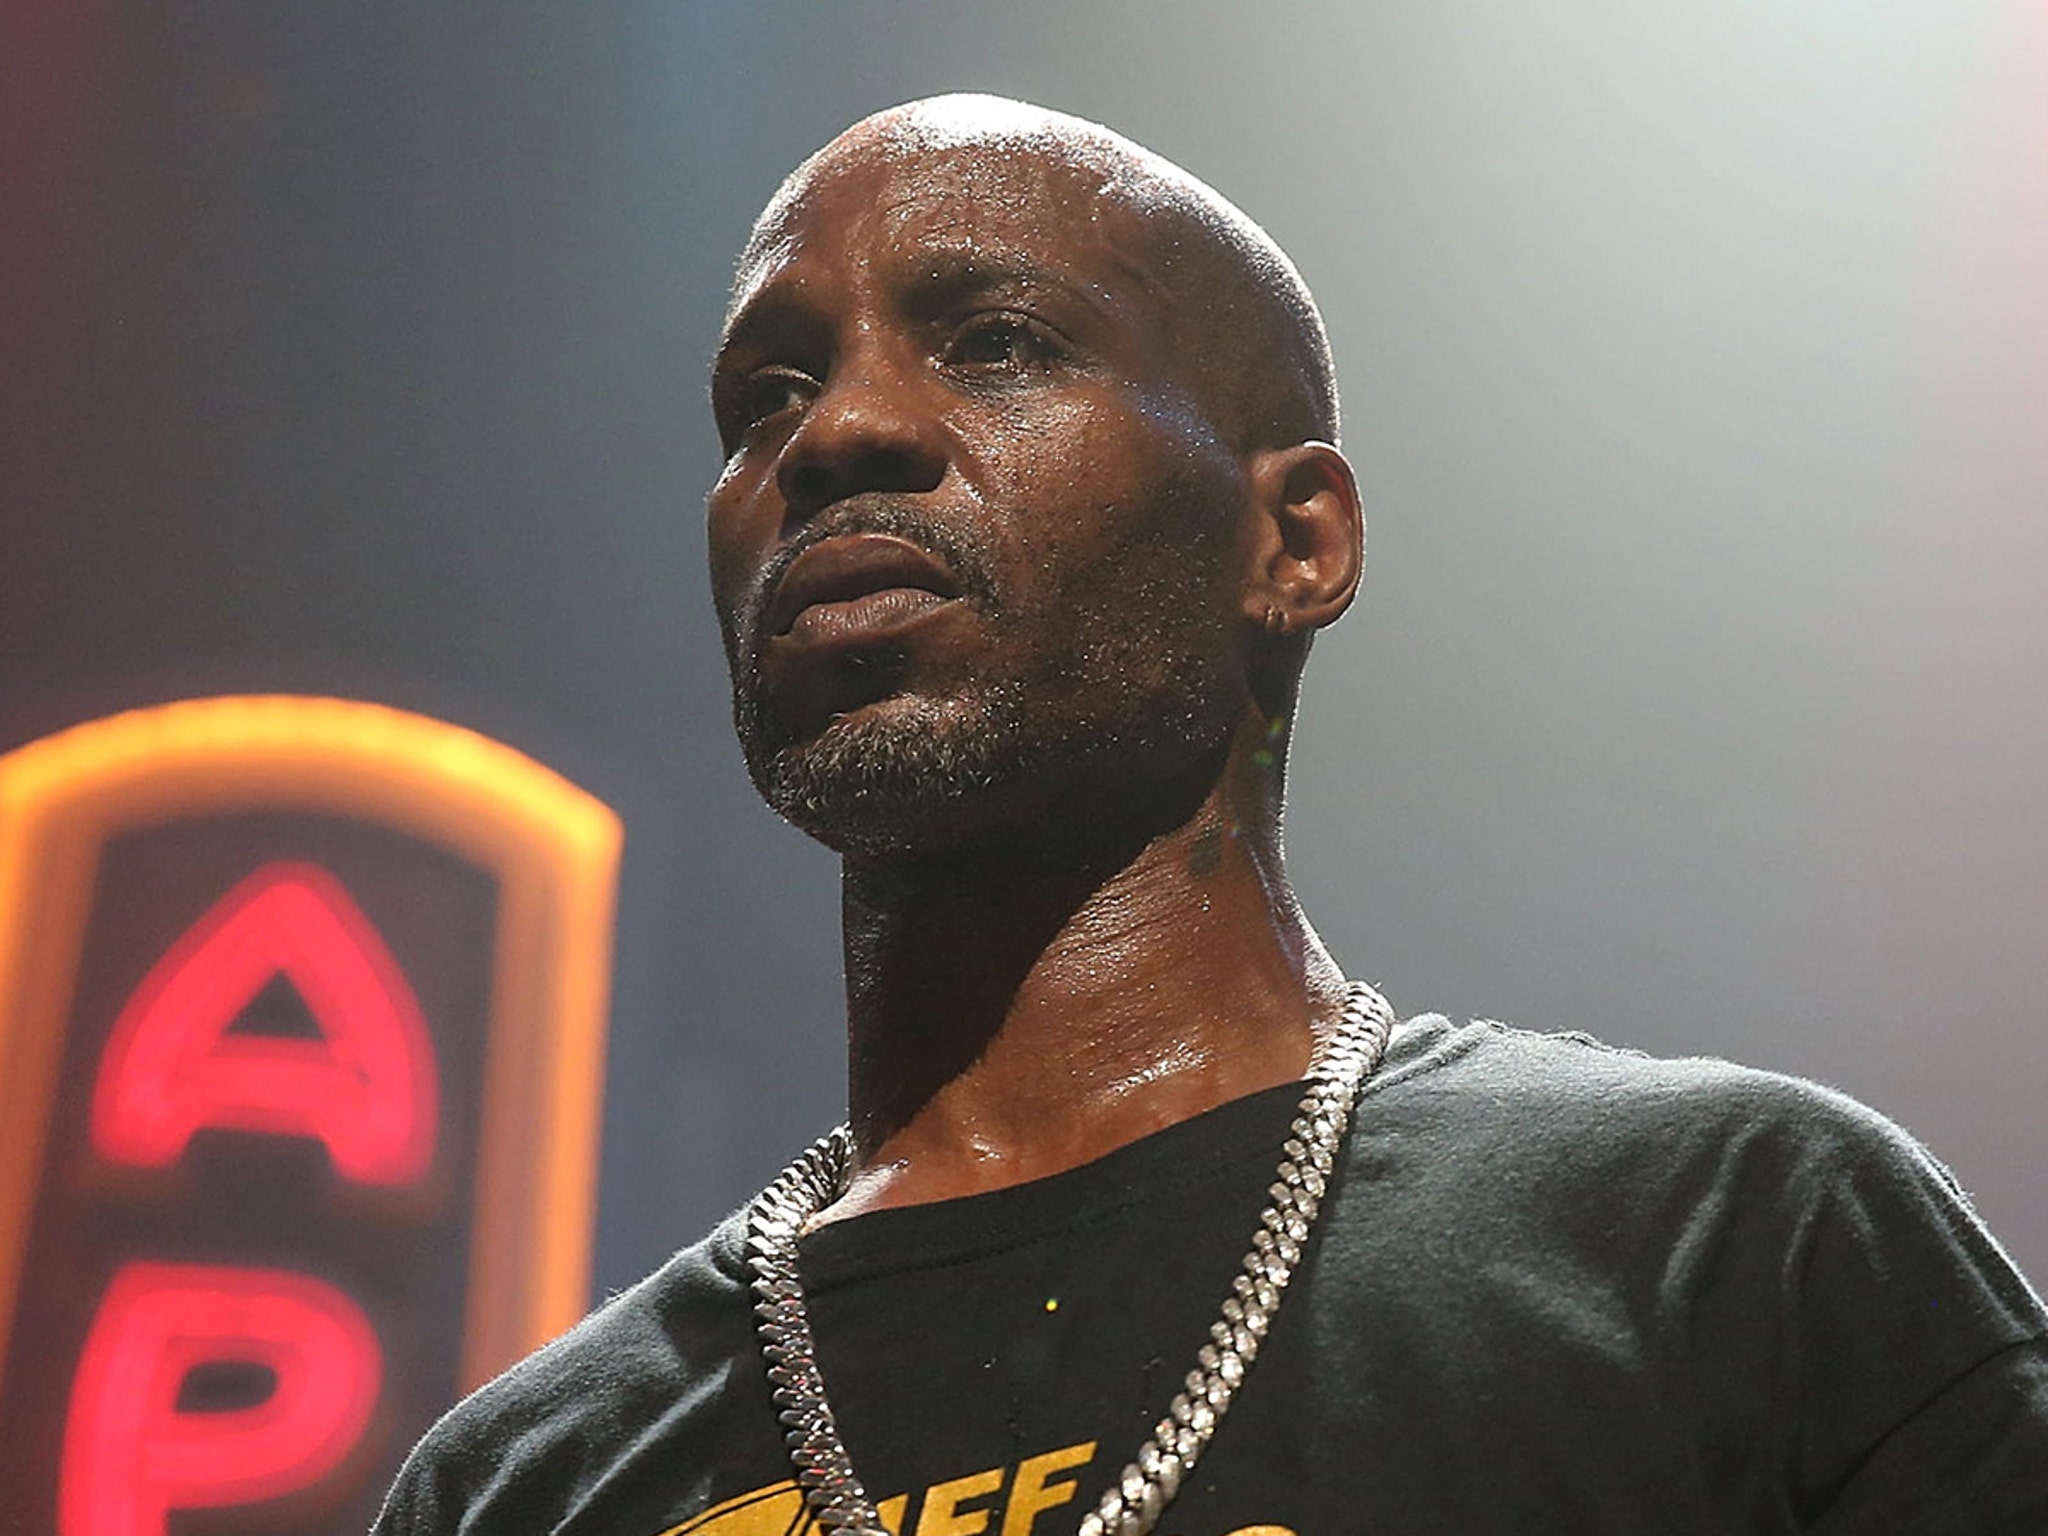 DMX Dead at 50, One Week After Hospitalization, Family Confirms